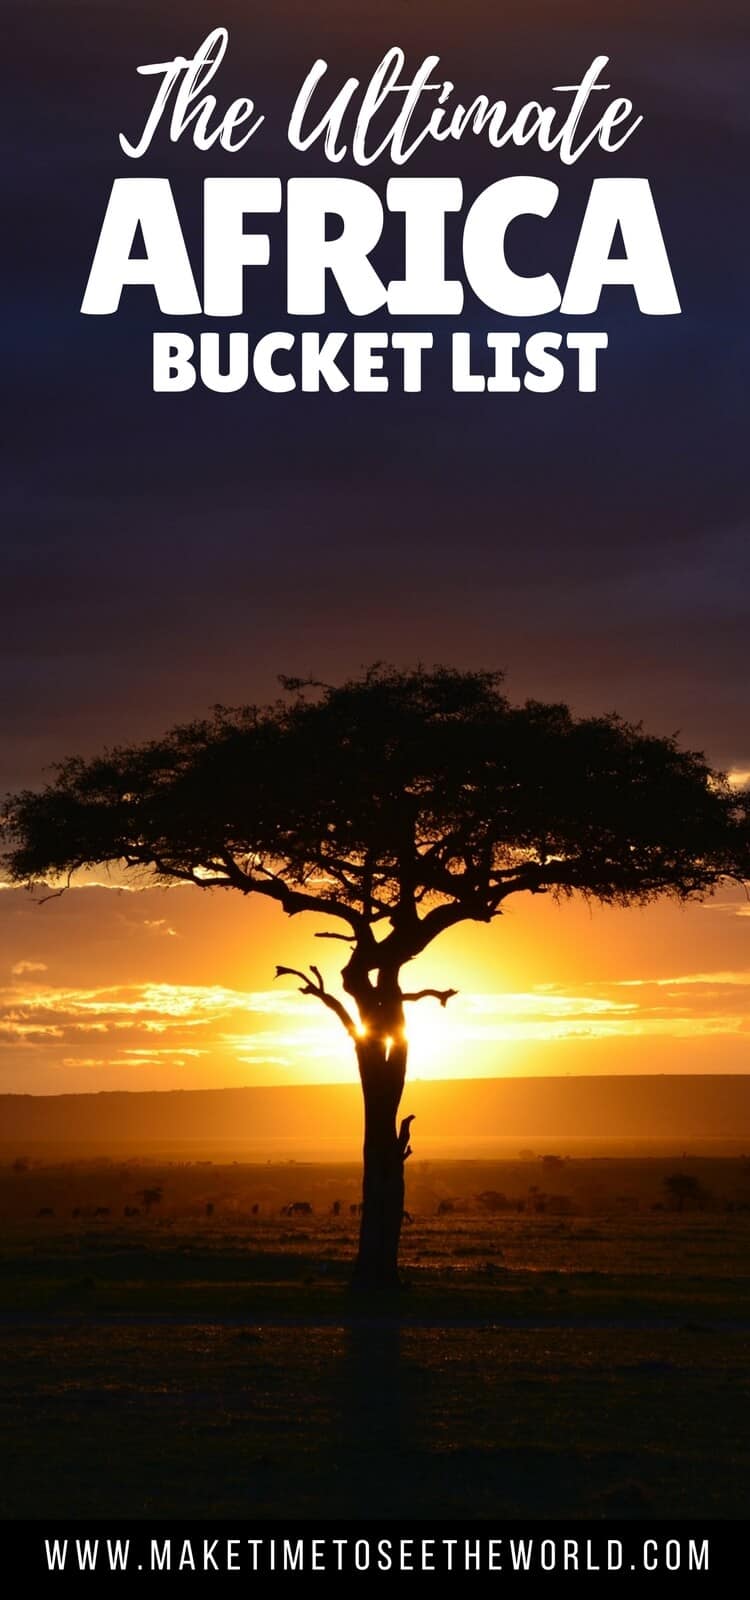 The Ultimate Africa Bucket List